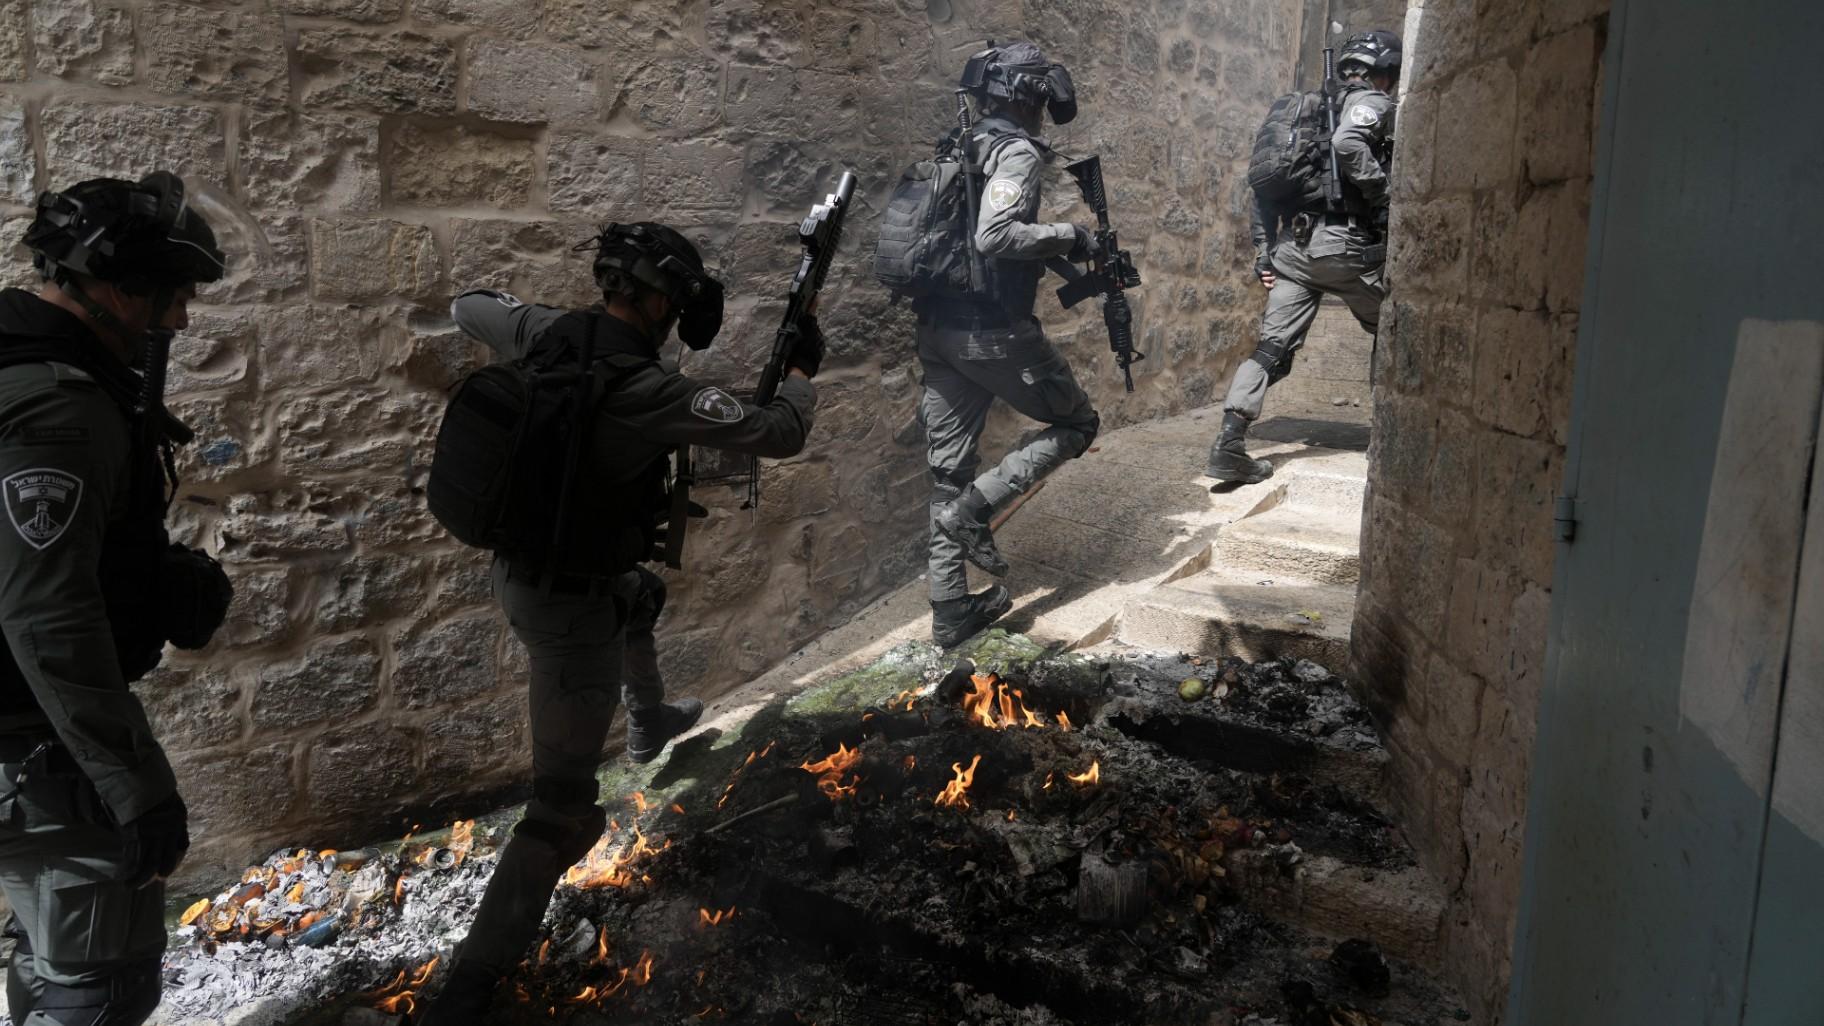 Israeli police are deployed in the Old City of Jerusalem, Sunday, April 17, 2022. (AP Photo / Mahmoud Illean)